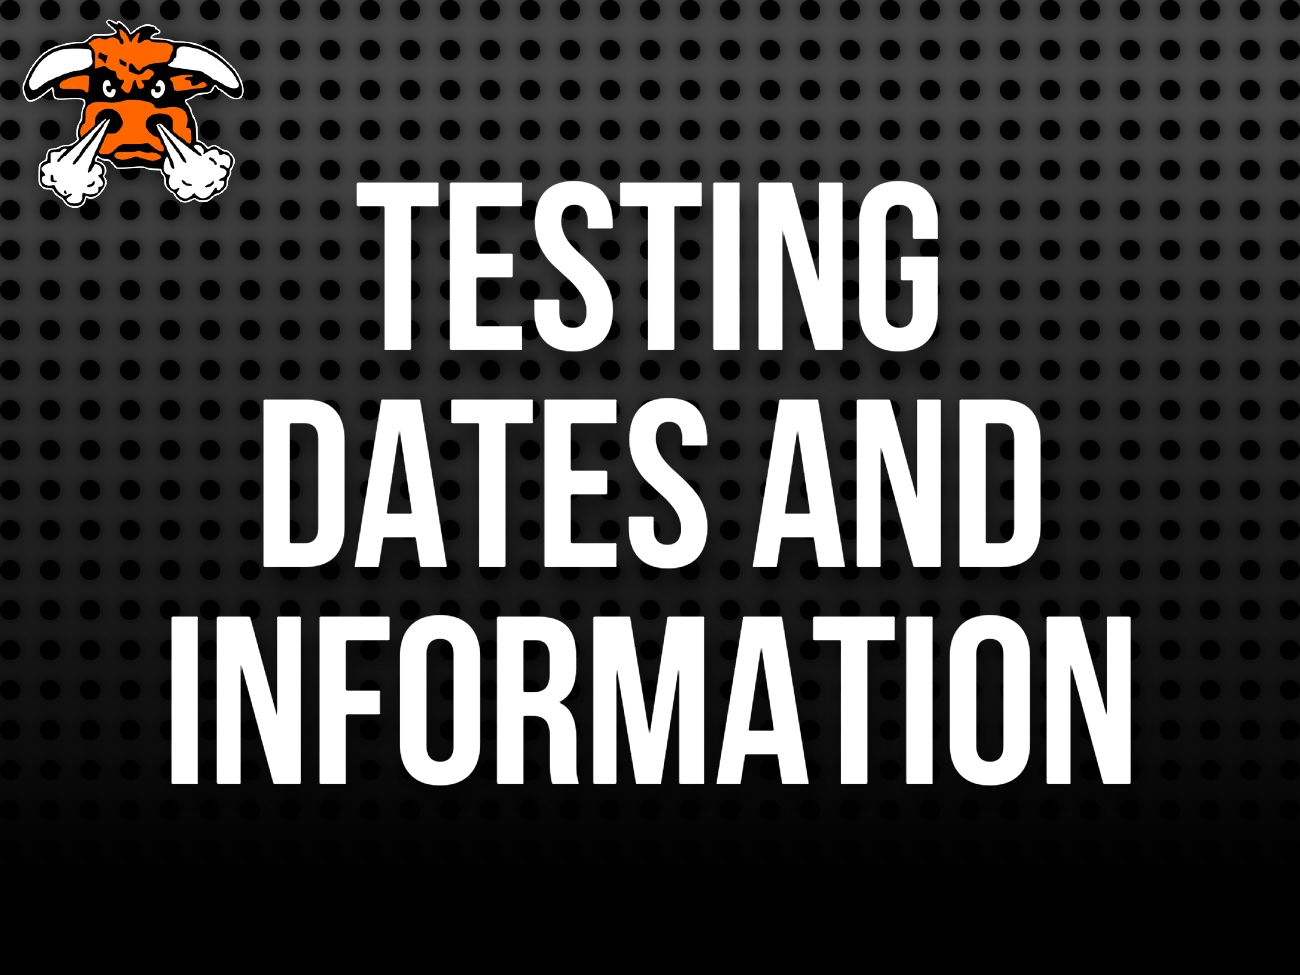 Testing dates and information